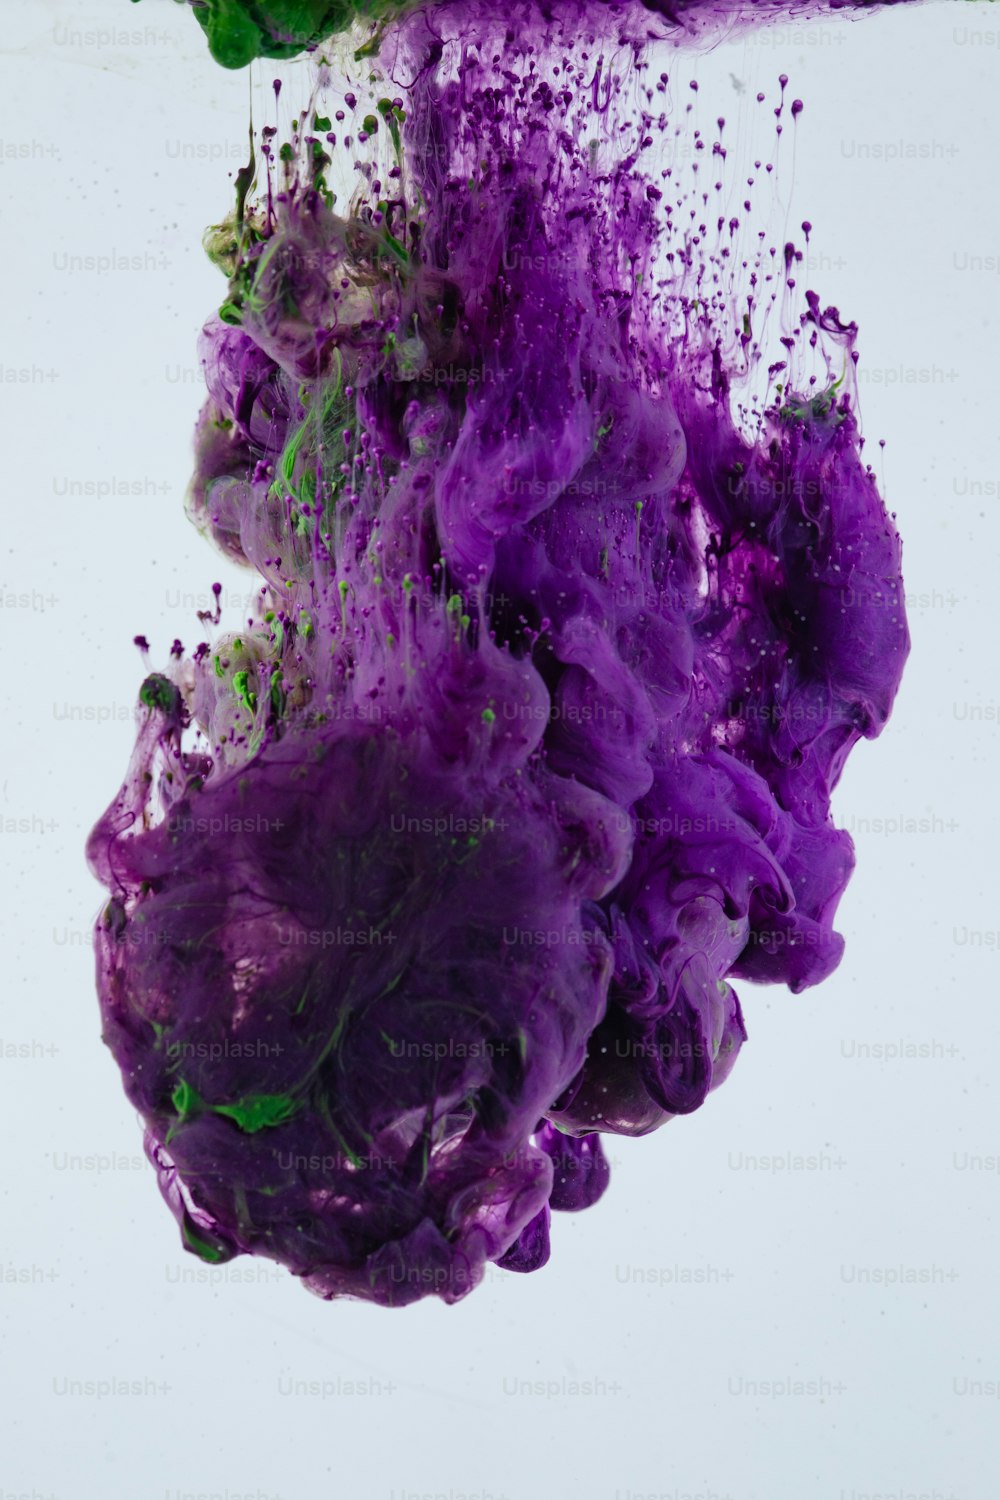 purple and green ink floating in water